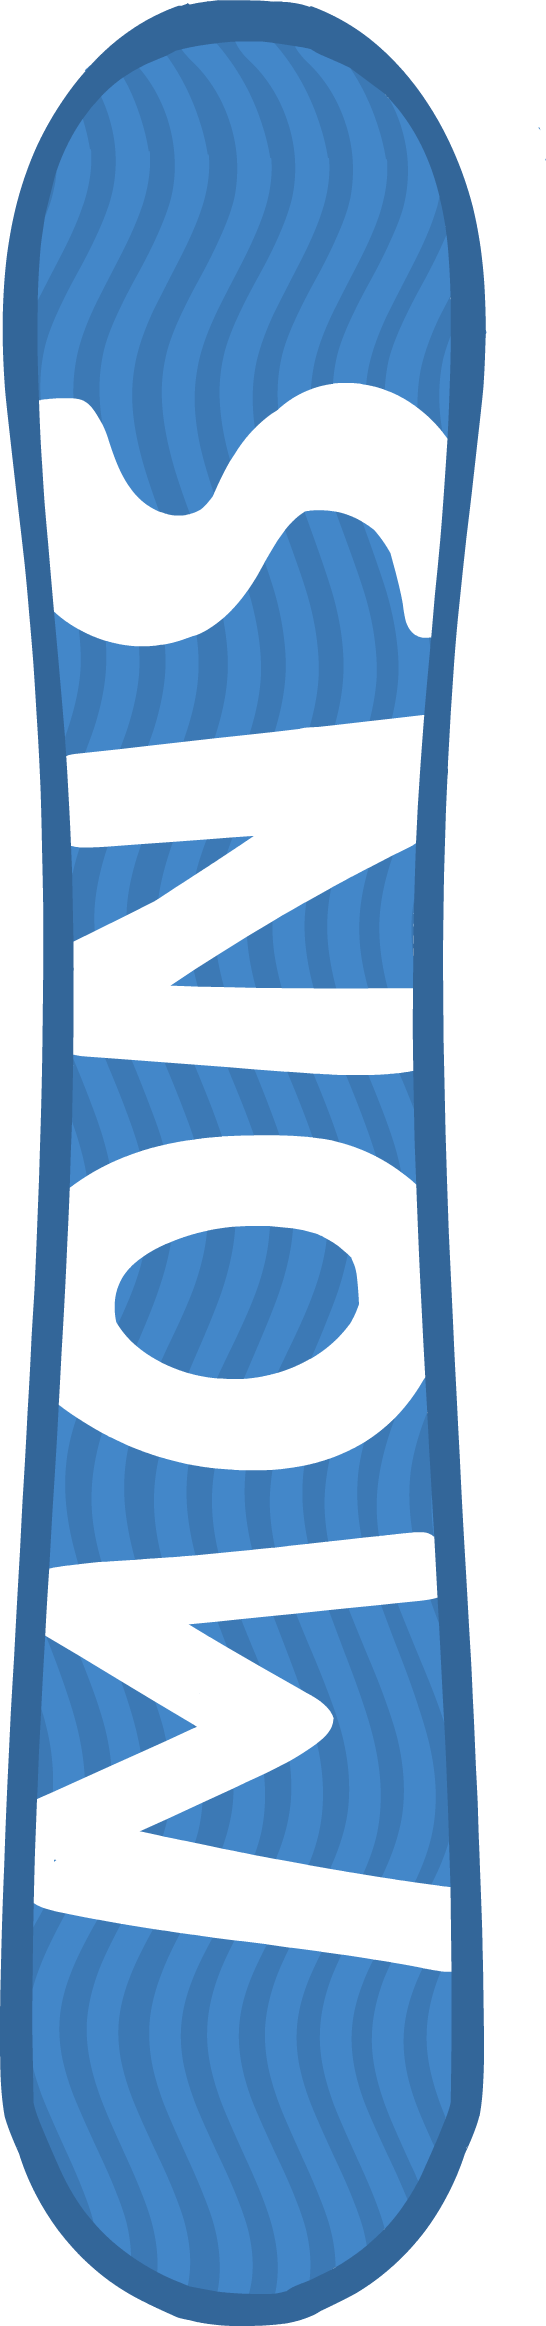 A Blue And White Rectangular Object With White Letters